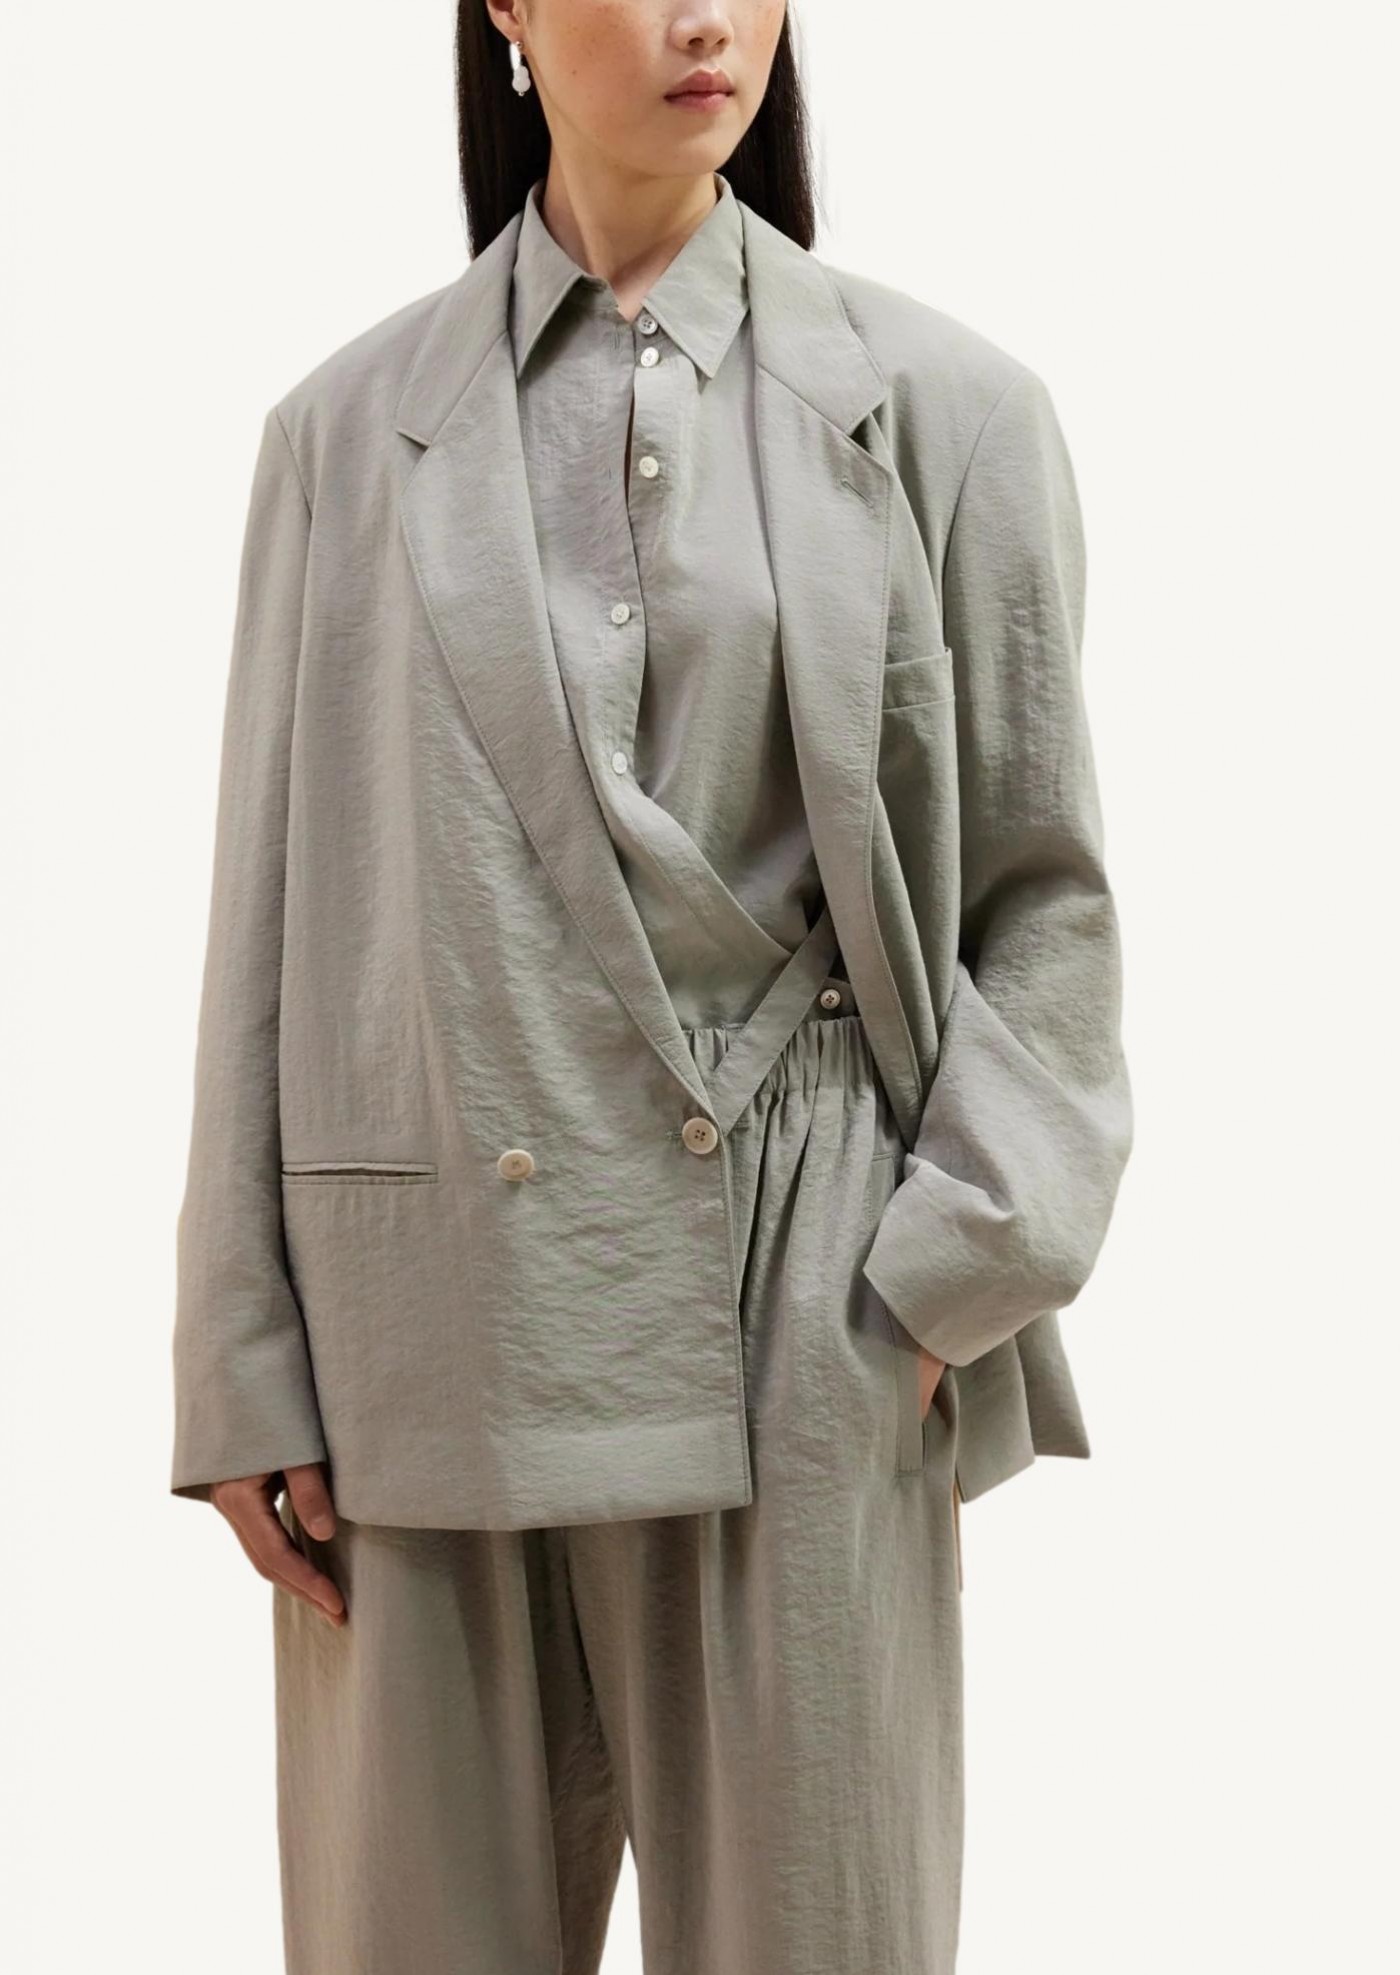 Double breasted jacket in dry silk misty grey